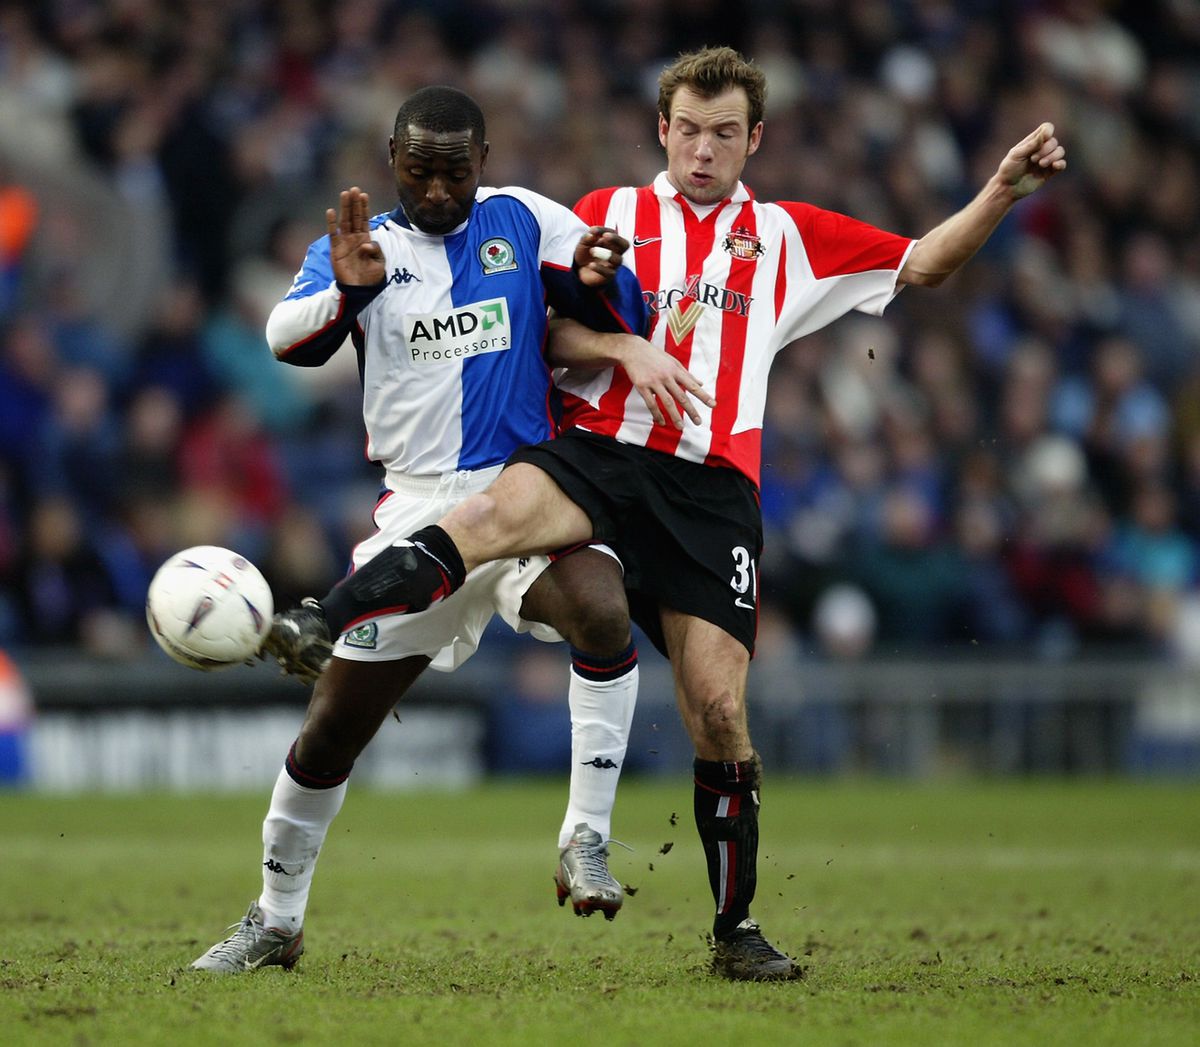 Marcus Stewart of Sunderland tackles Andrew Cole of Blackburn Rovers